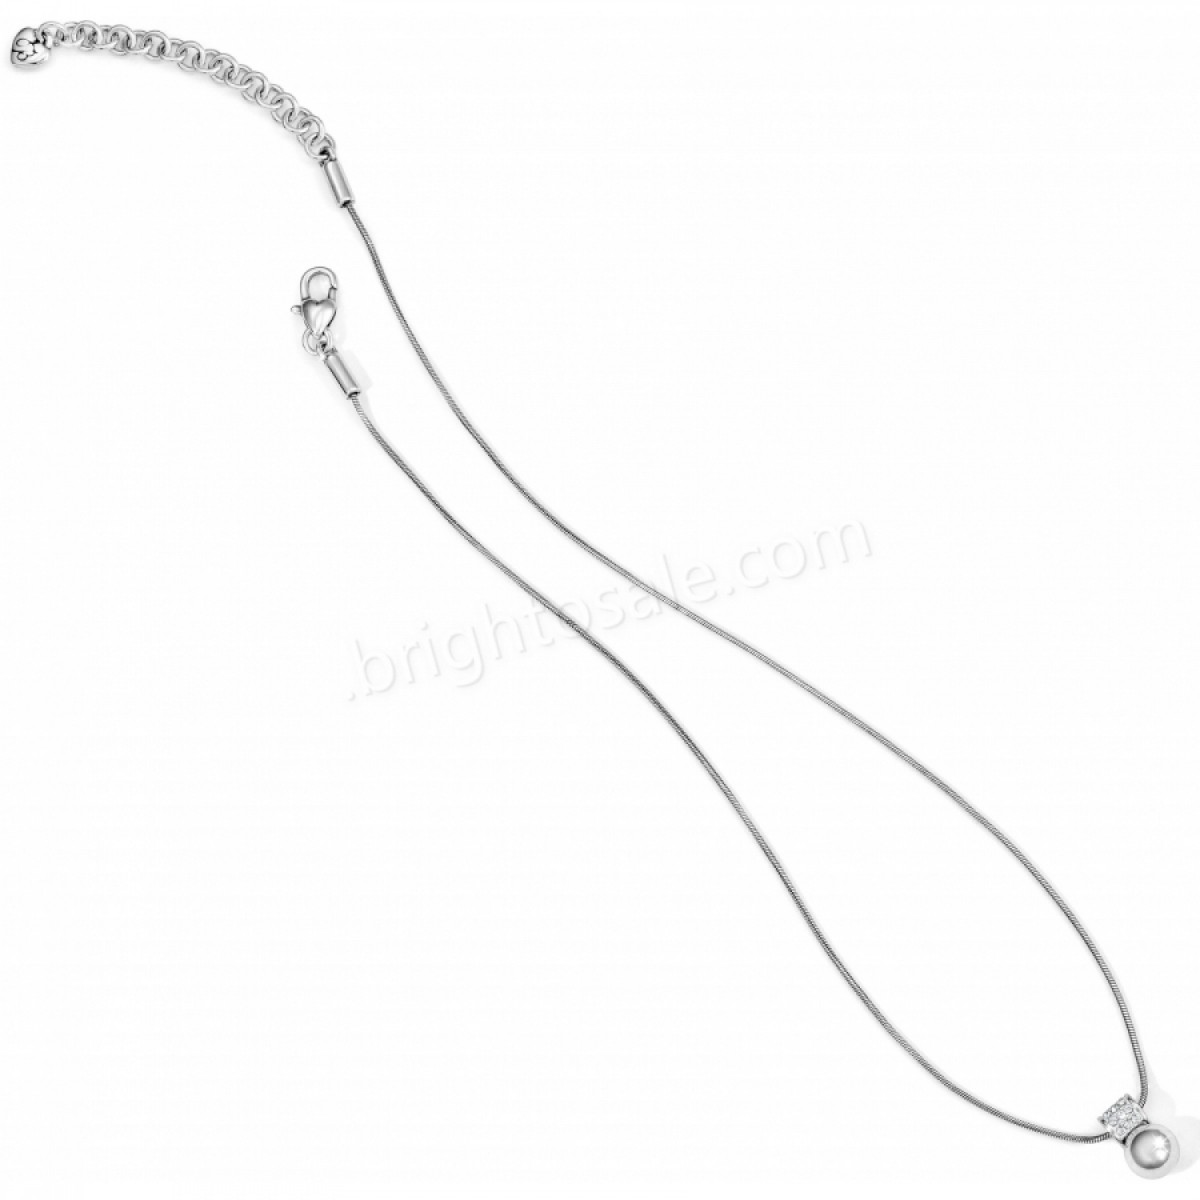 Brighton Collectibles & Online Discount Neptune's Rings Petite Tassel Necklace - -1